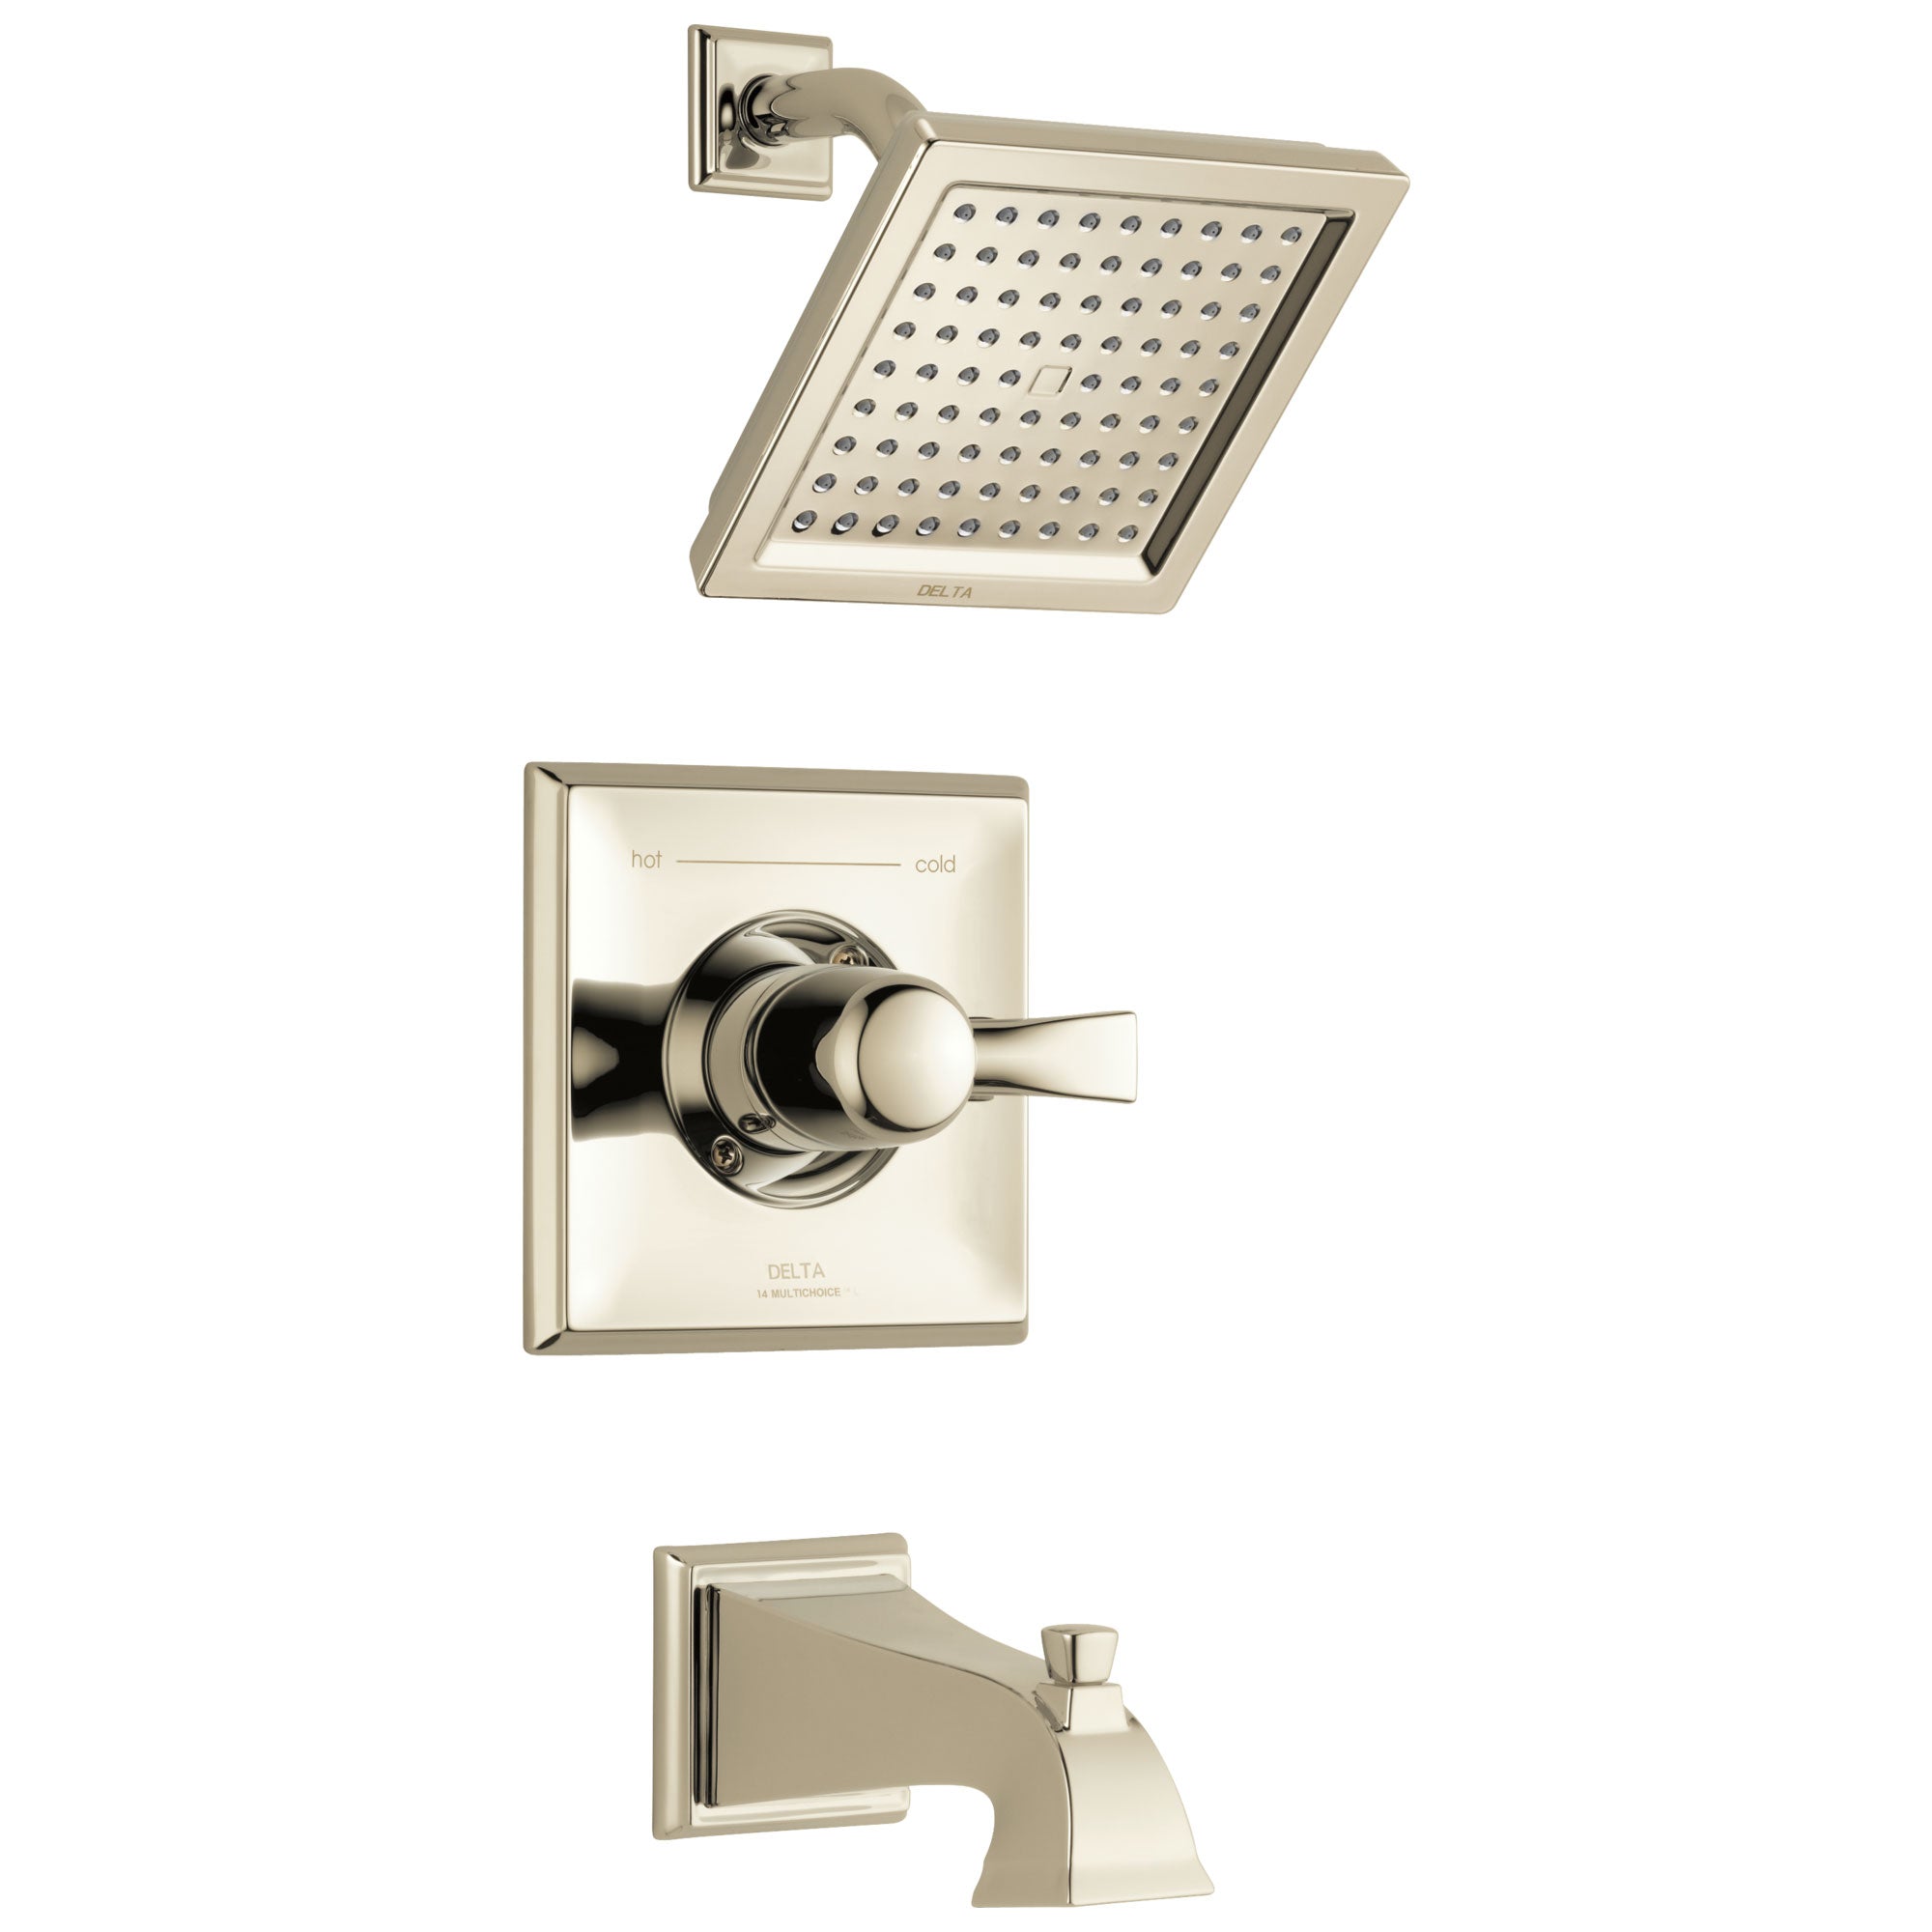 Delta Dryden Polished Nickel Finish Monitor 14 Series Water Efficient Tub & Shower Combination Faucet Trim Kit (Requires Valve) DT14451PNWE